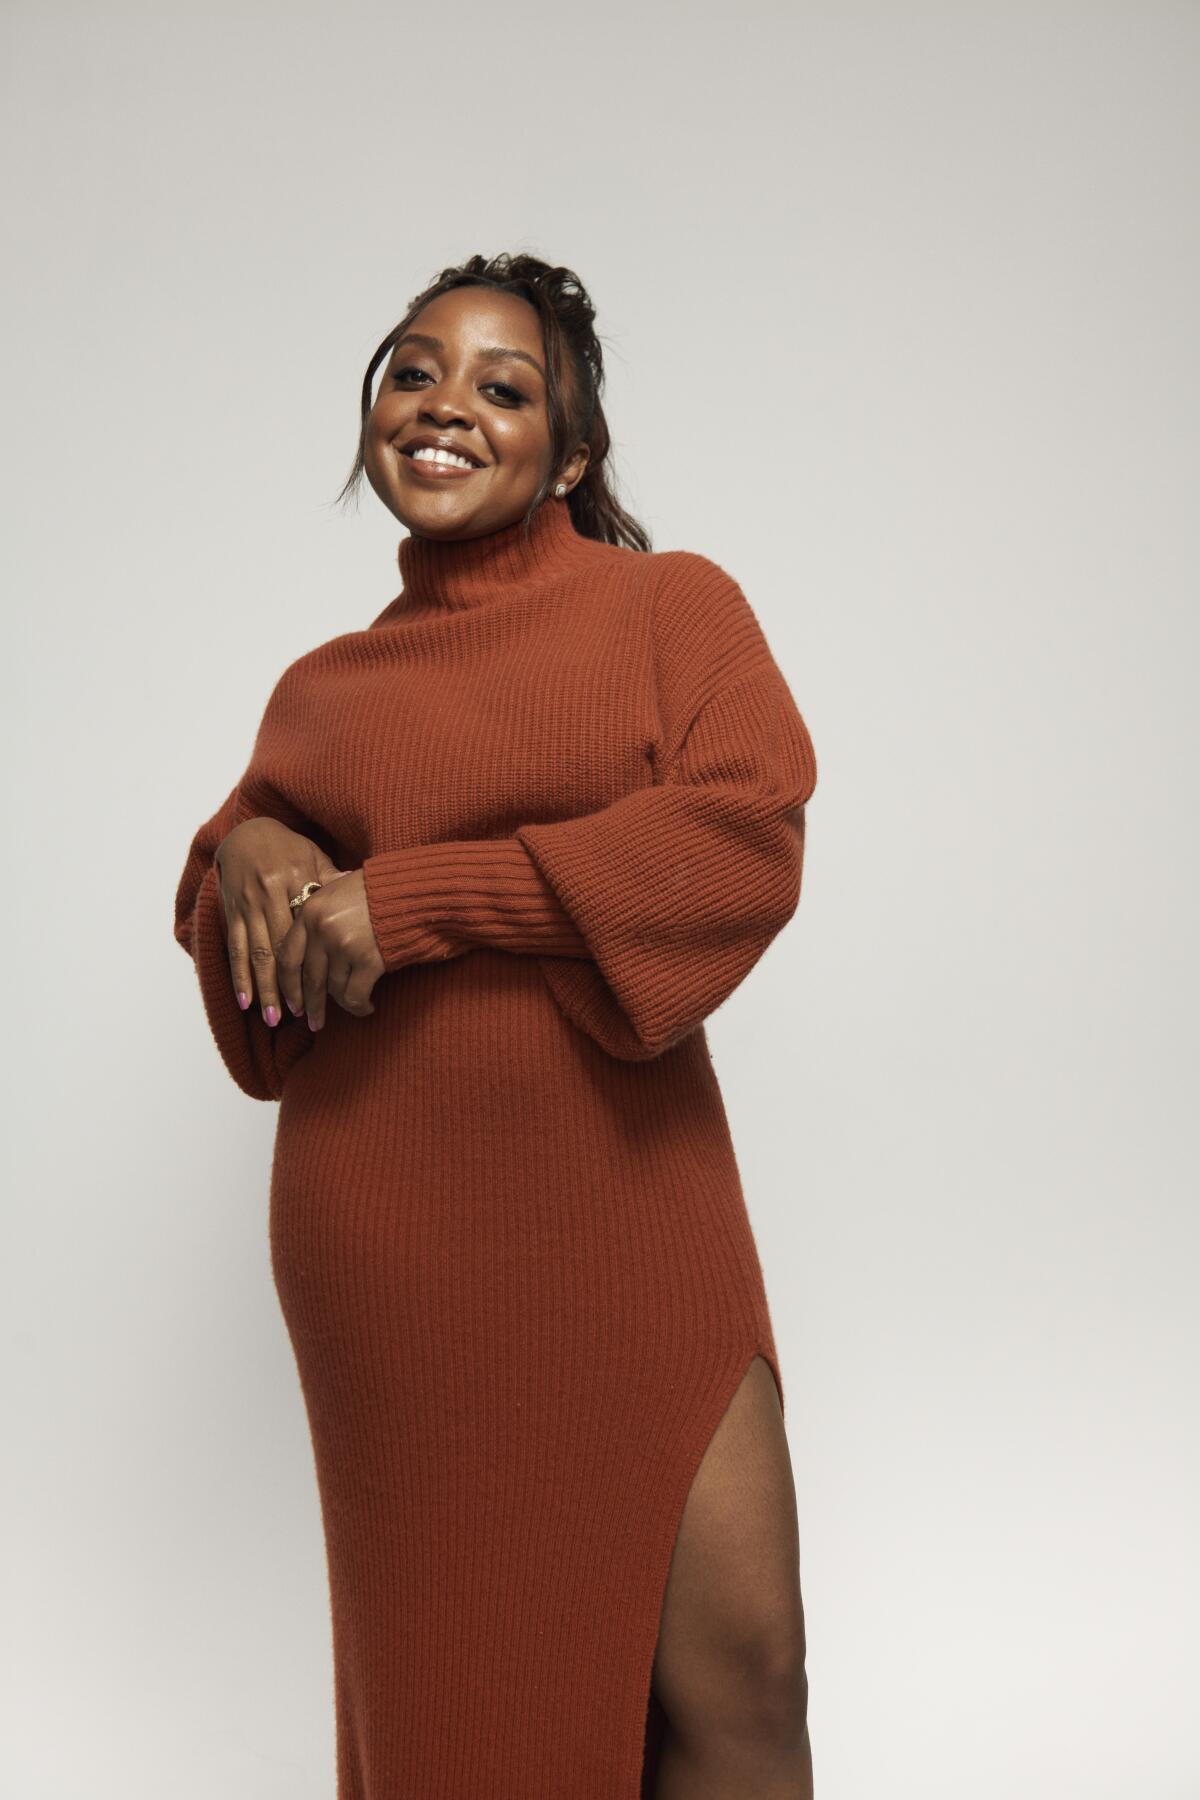 Quinta Brunson poses for a portrait in a sweater dress with a side slit.